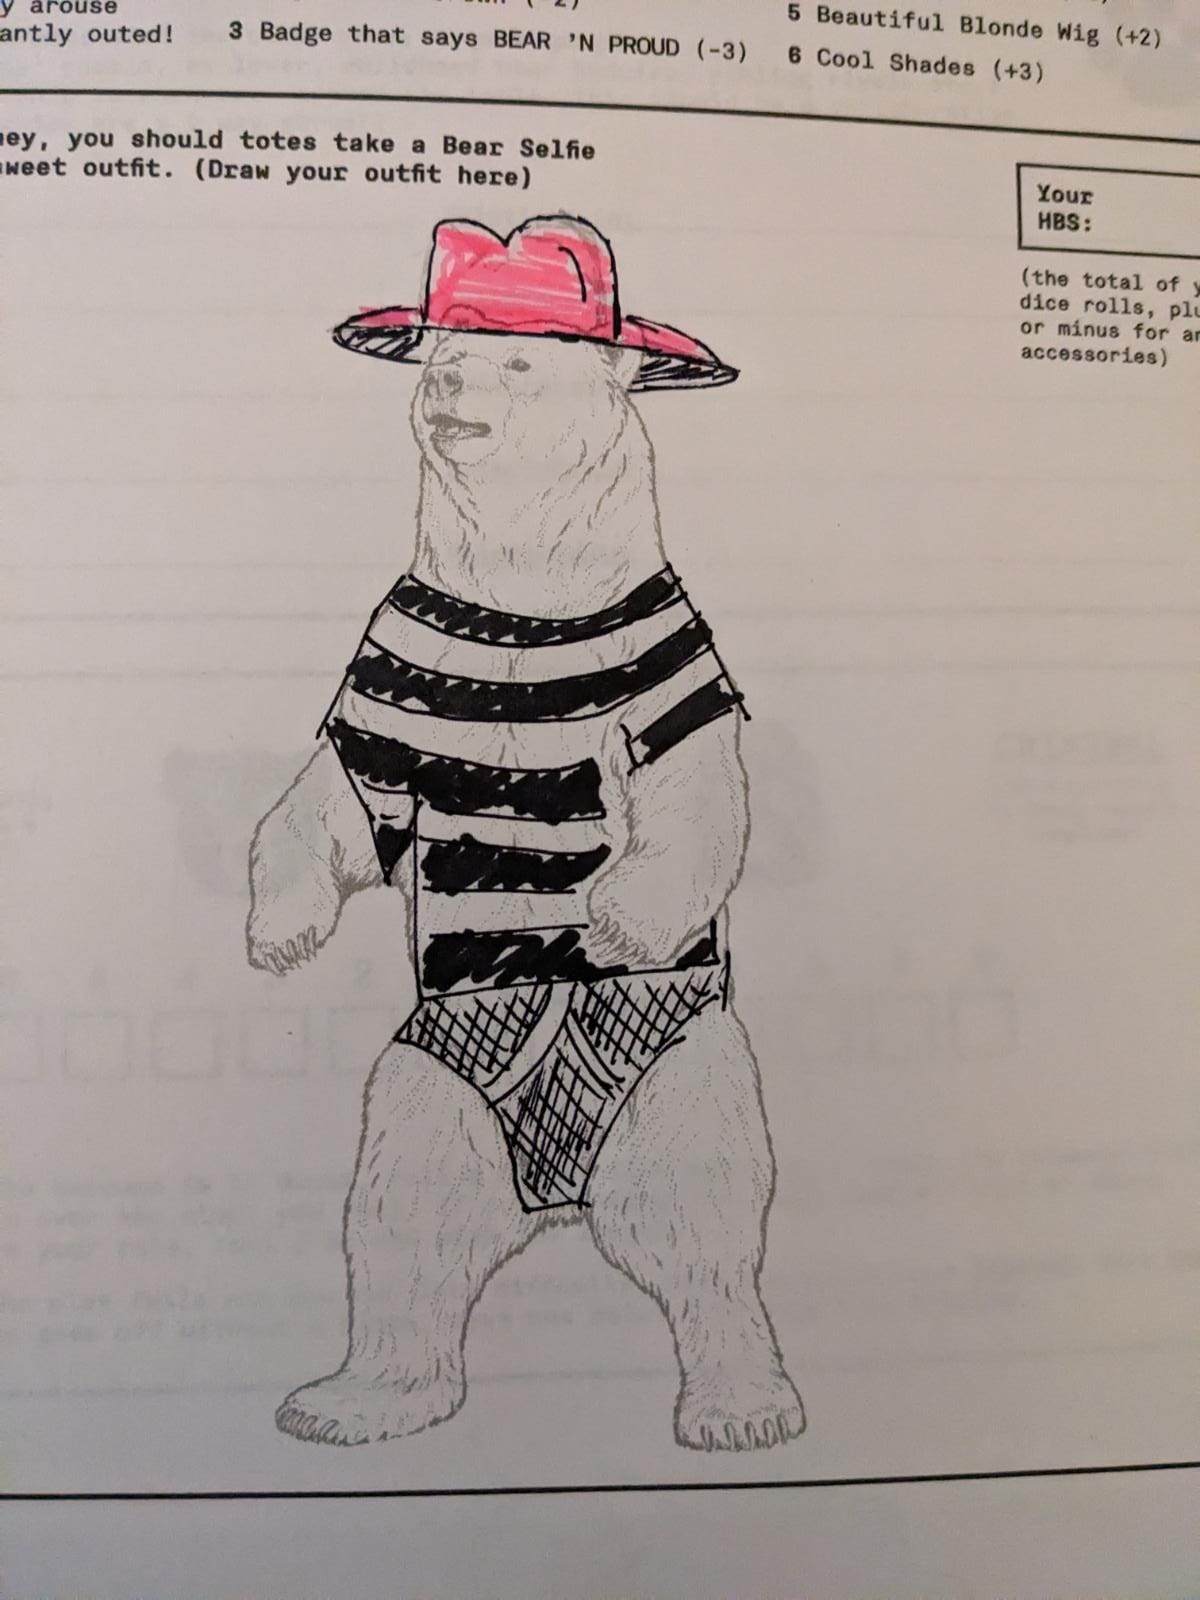 "A drawing of a bear in a pink hat wearing bondage gear."